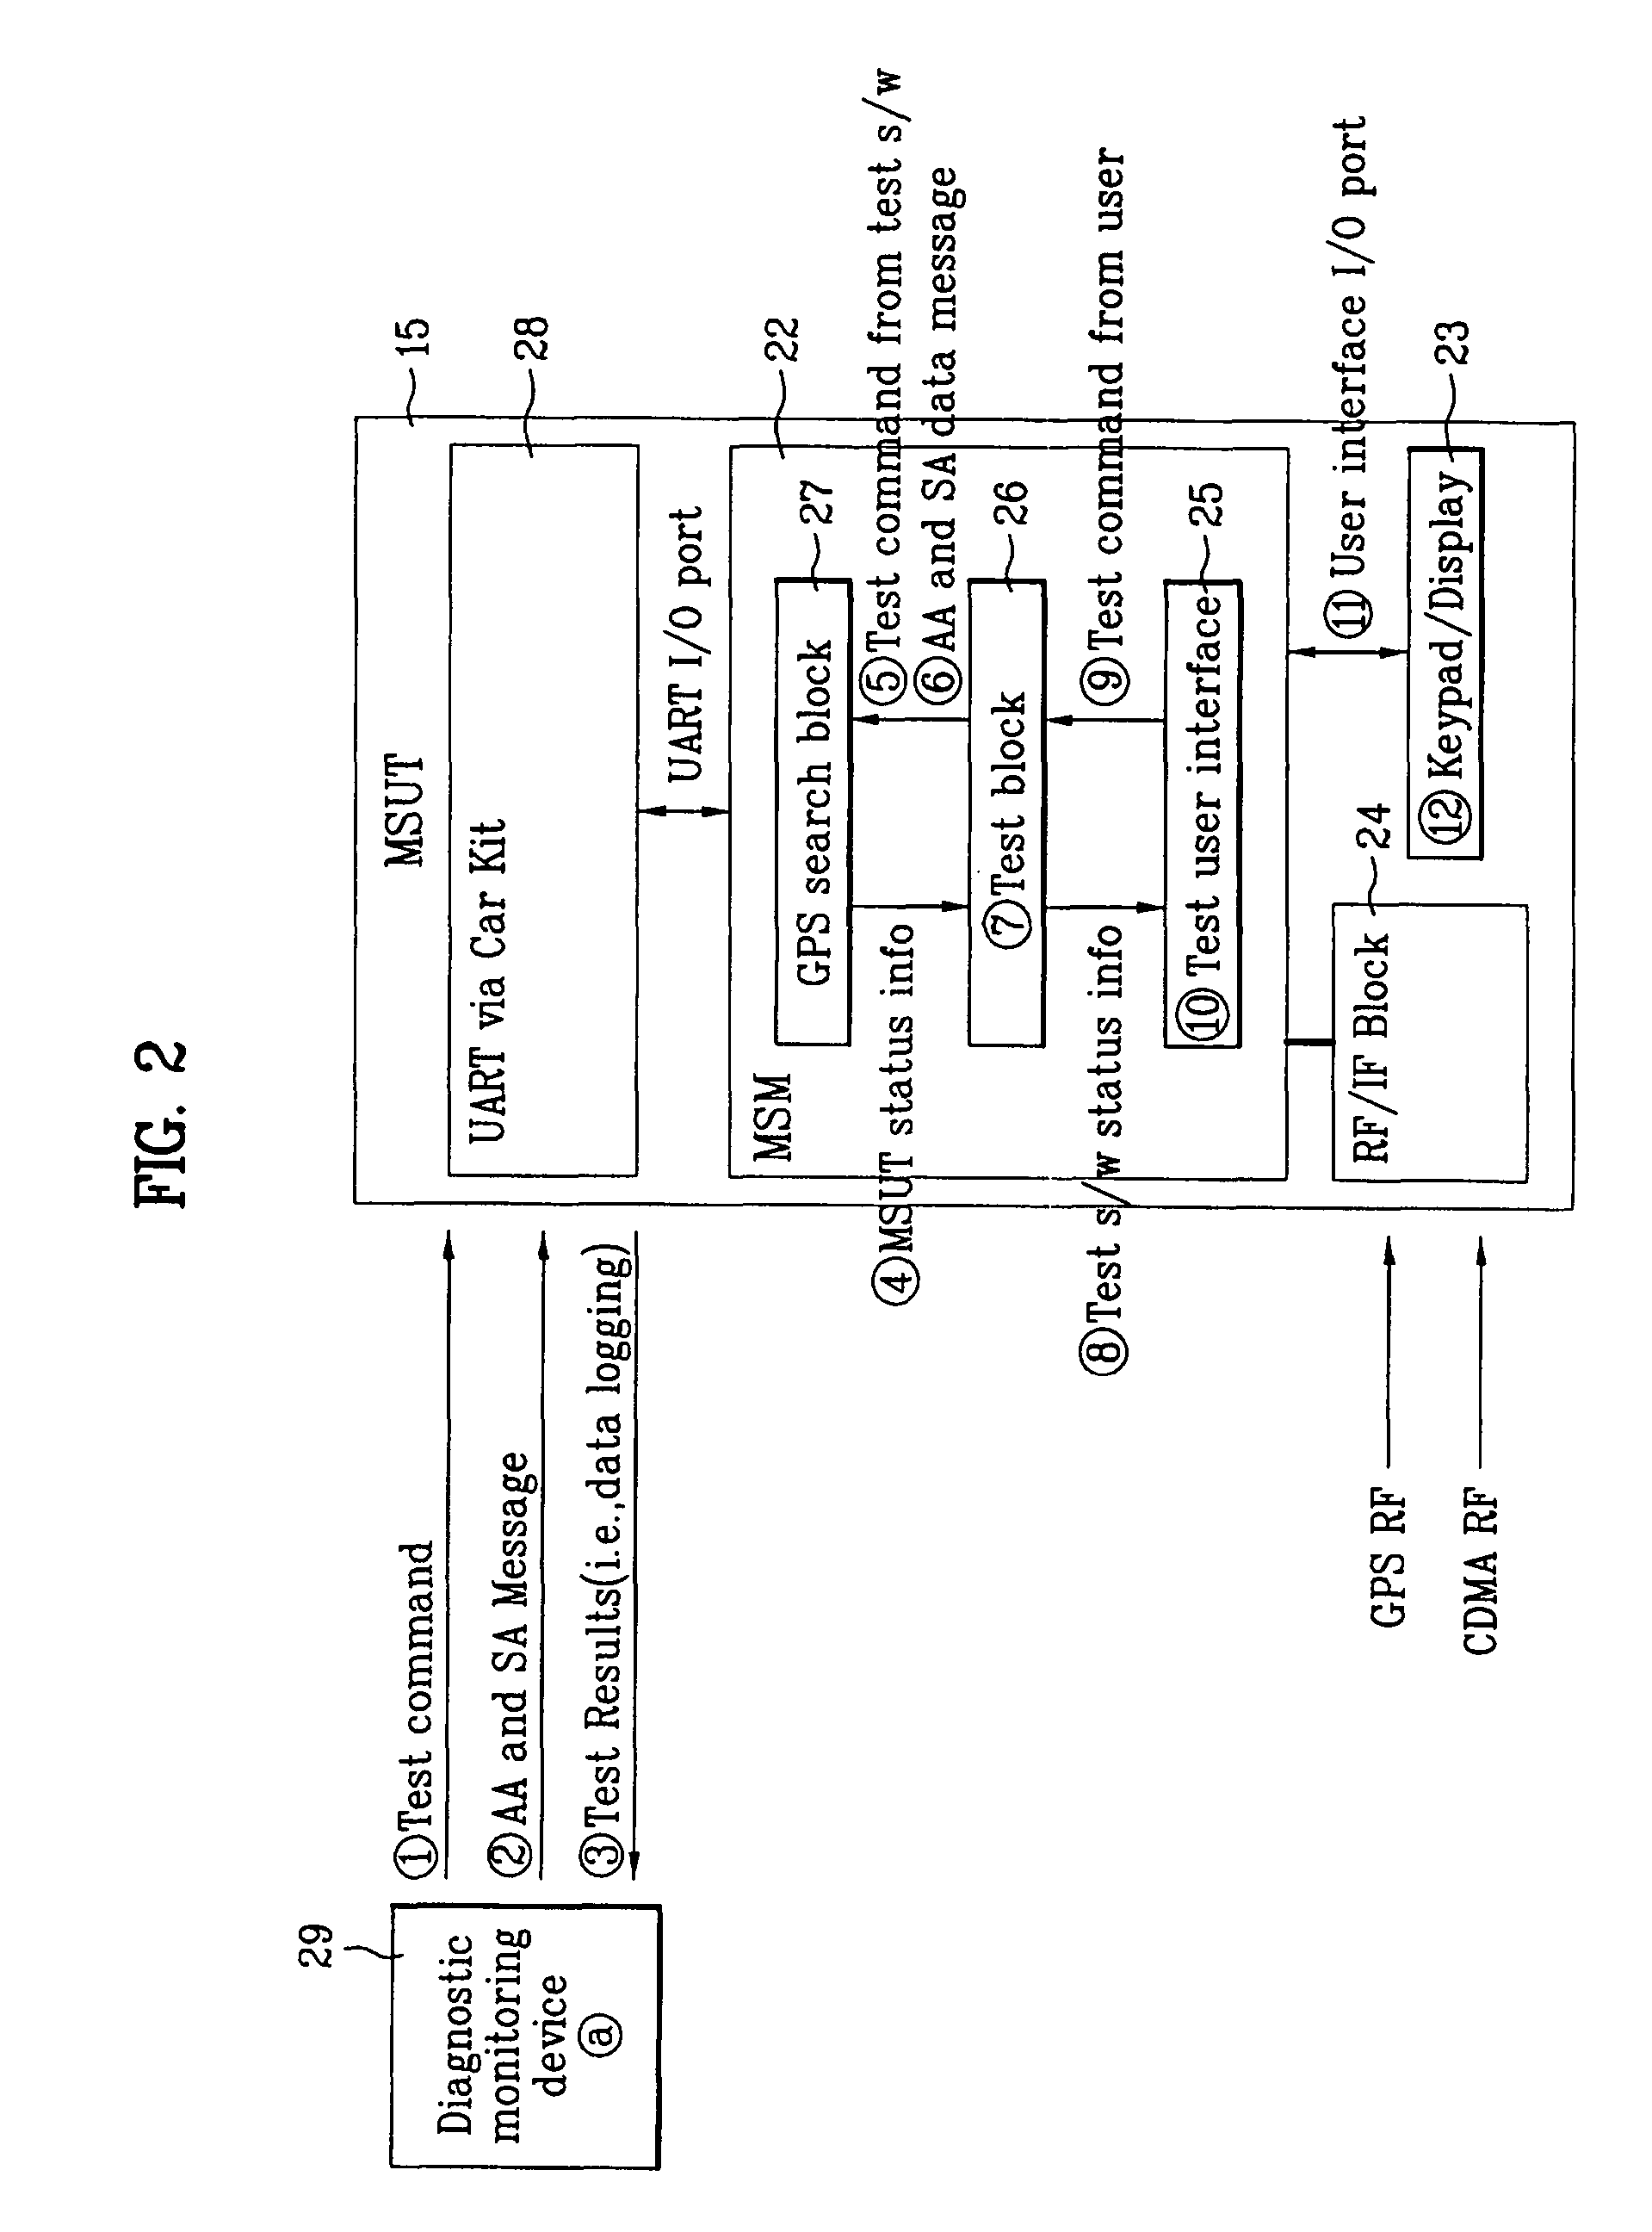 Apparatus and method for testing performance of mobile station having GPS function